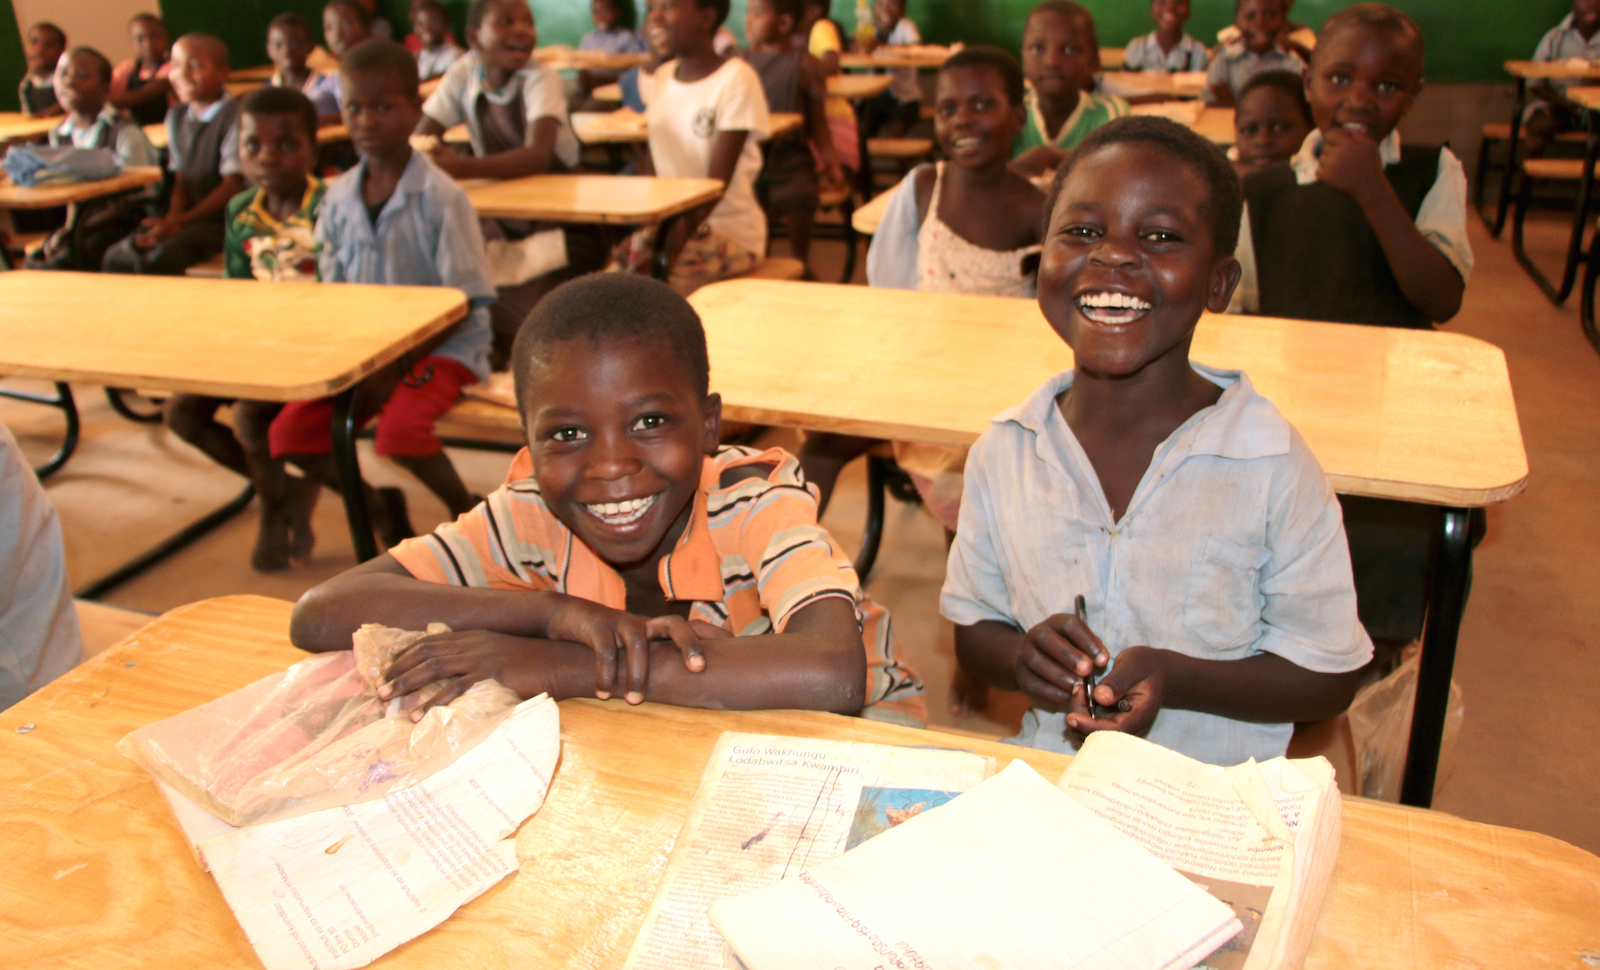 Since 2010, K.I.N.D. has delivered almost 150,000 desks to students in Malawi.